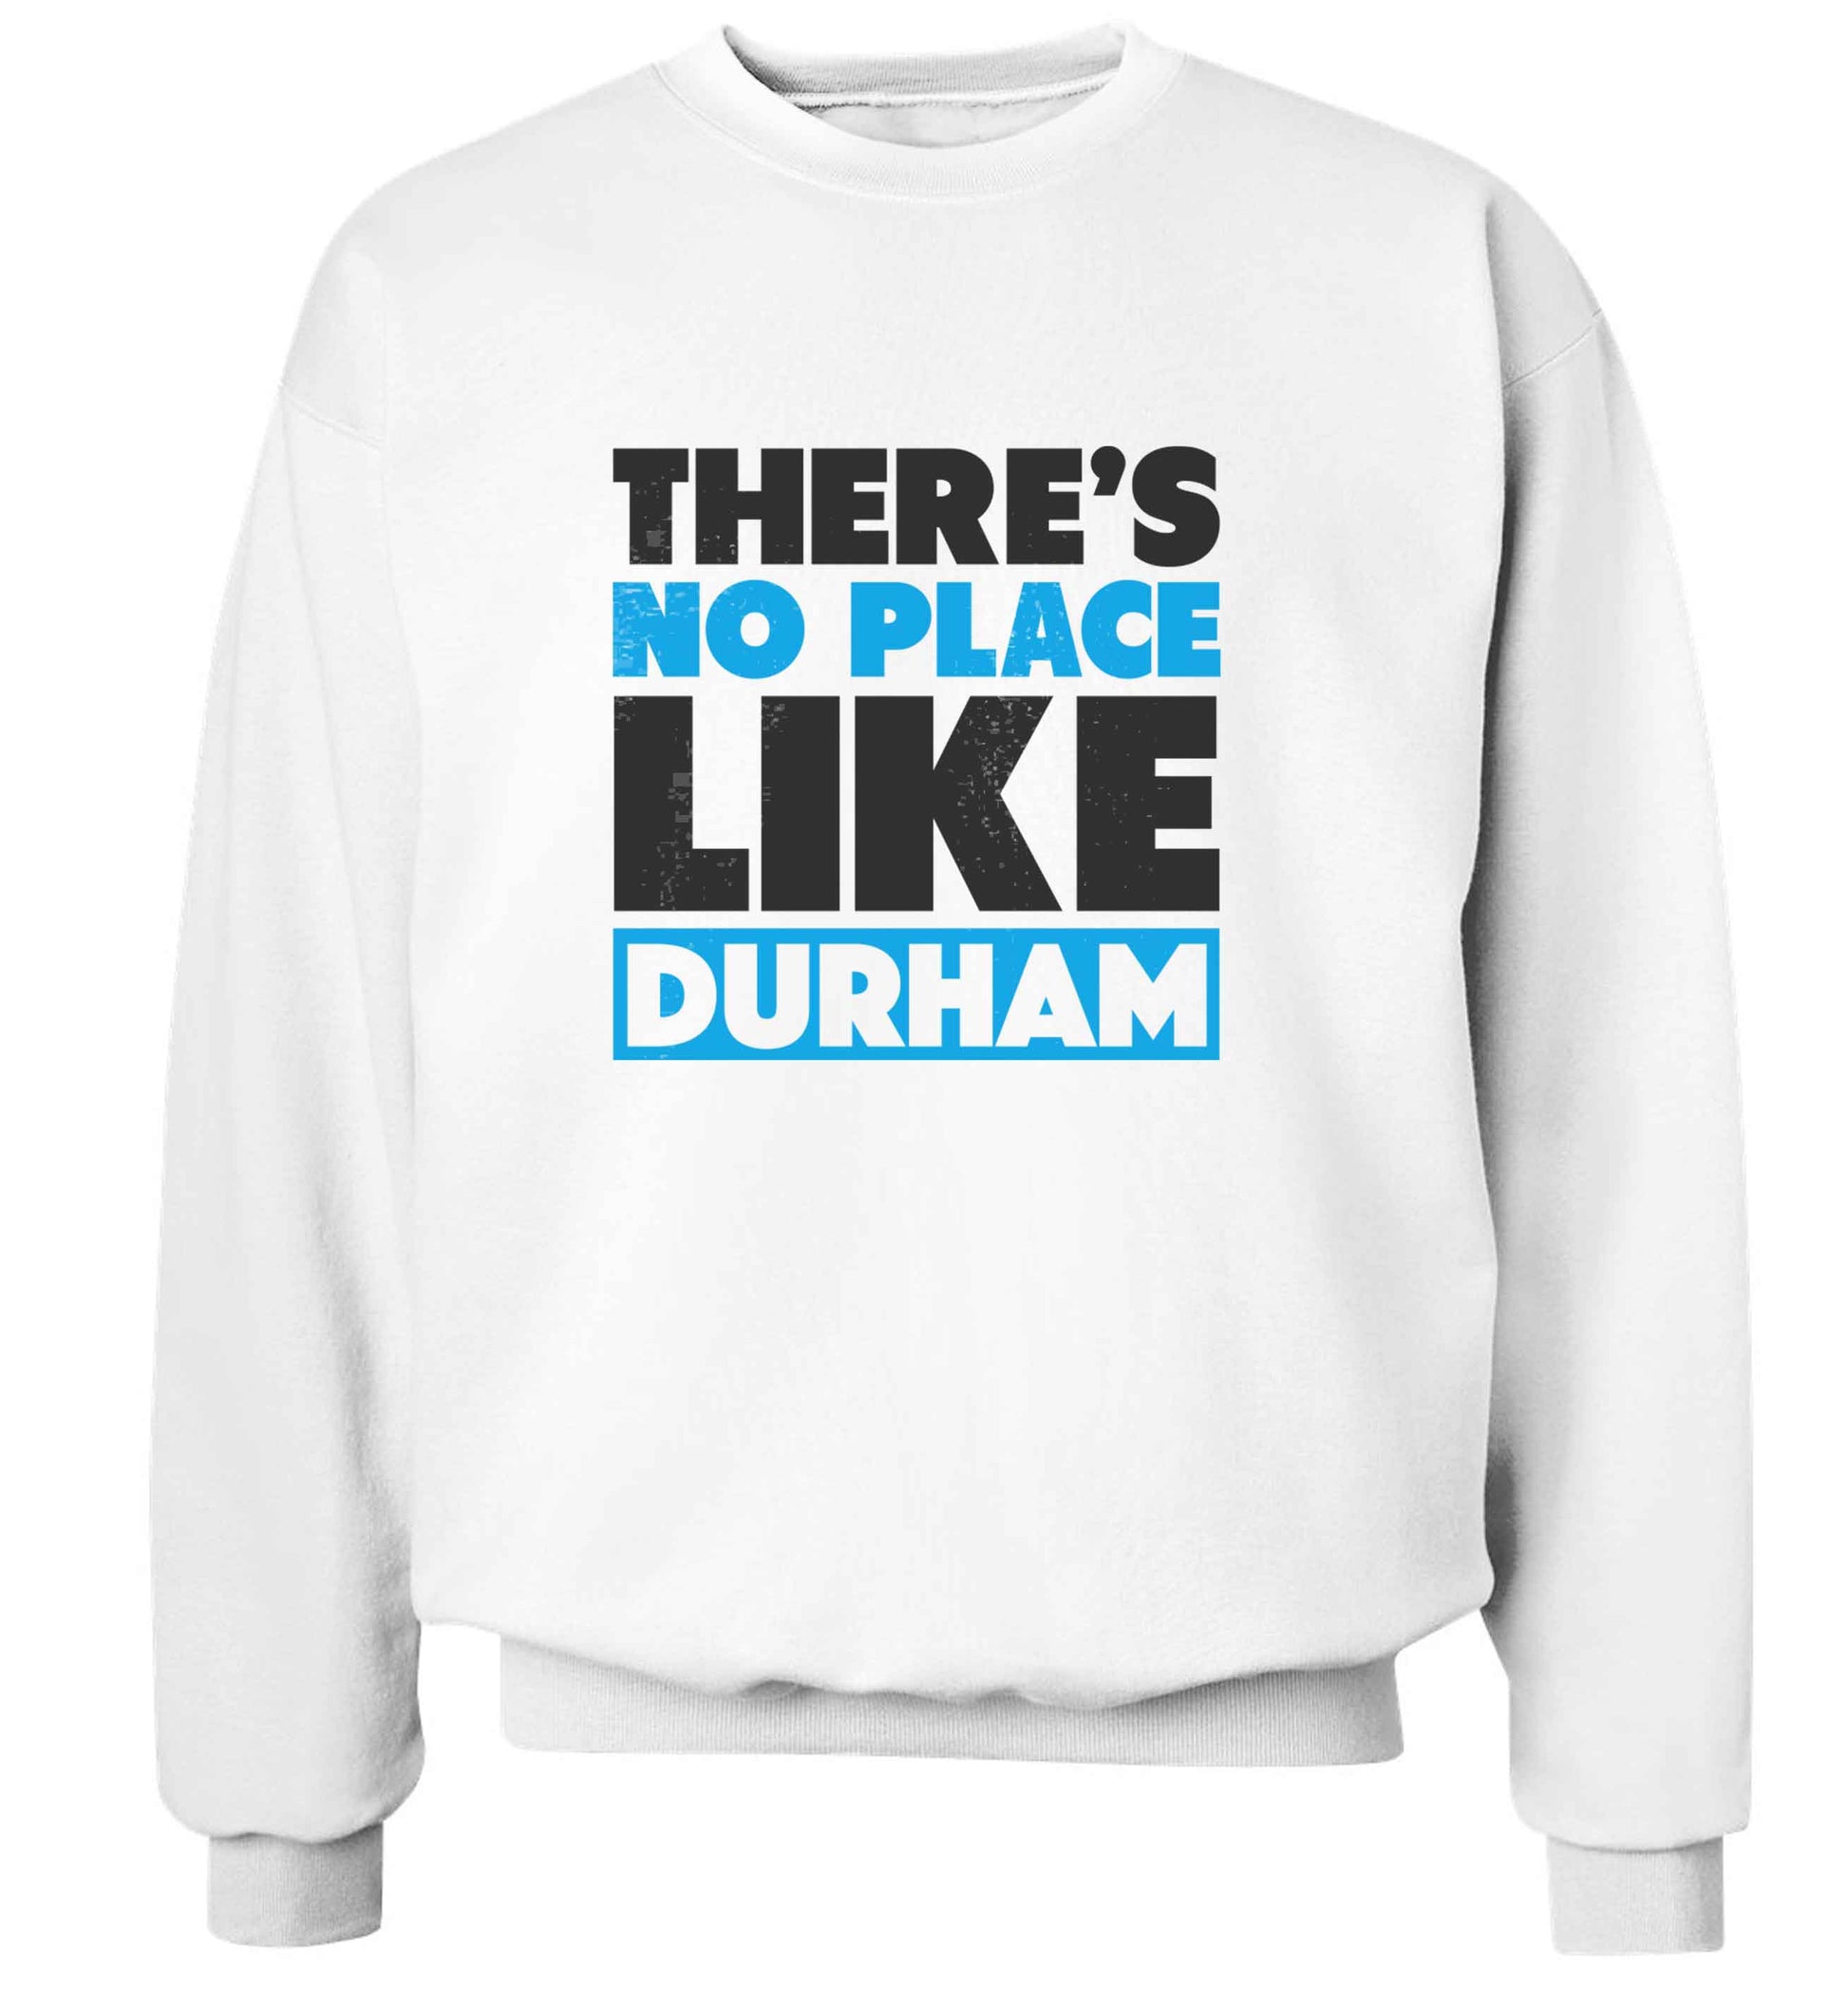 There's no place like Durham adult's unisex white sweater 2XL